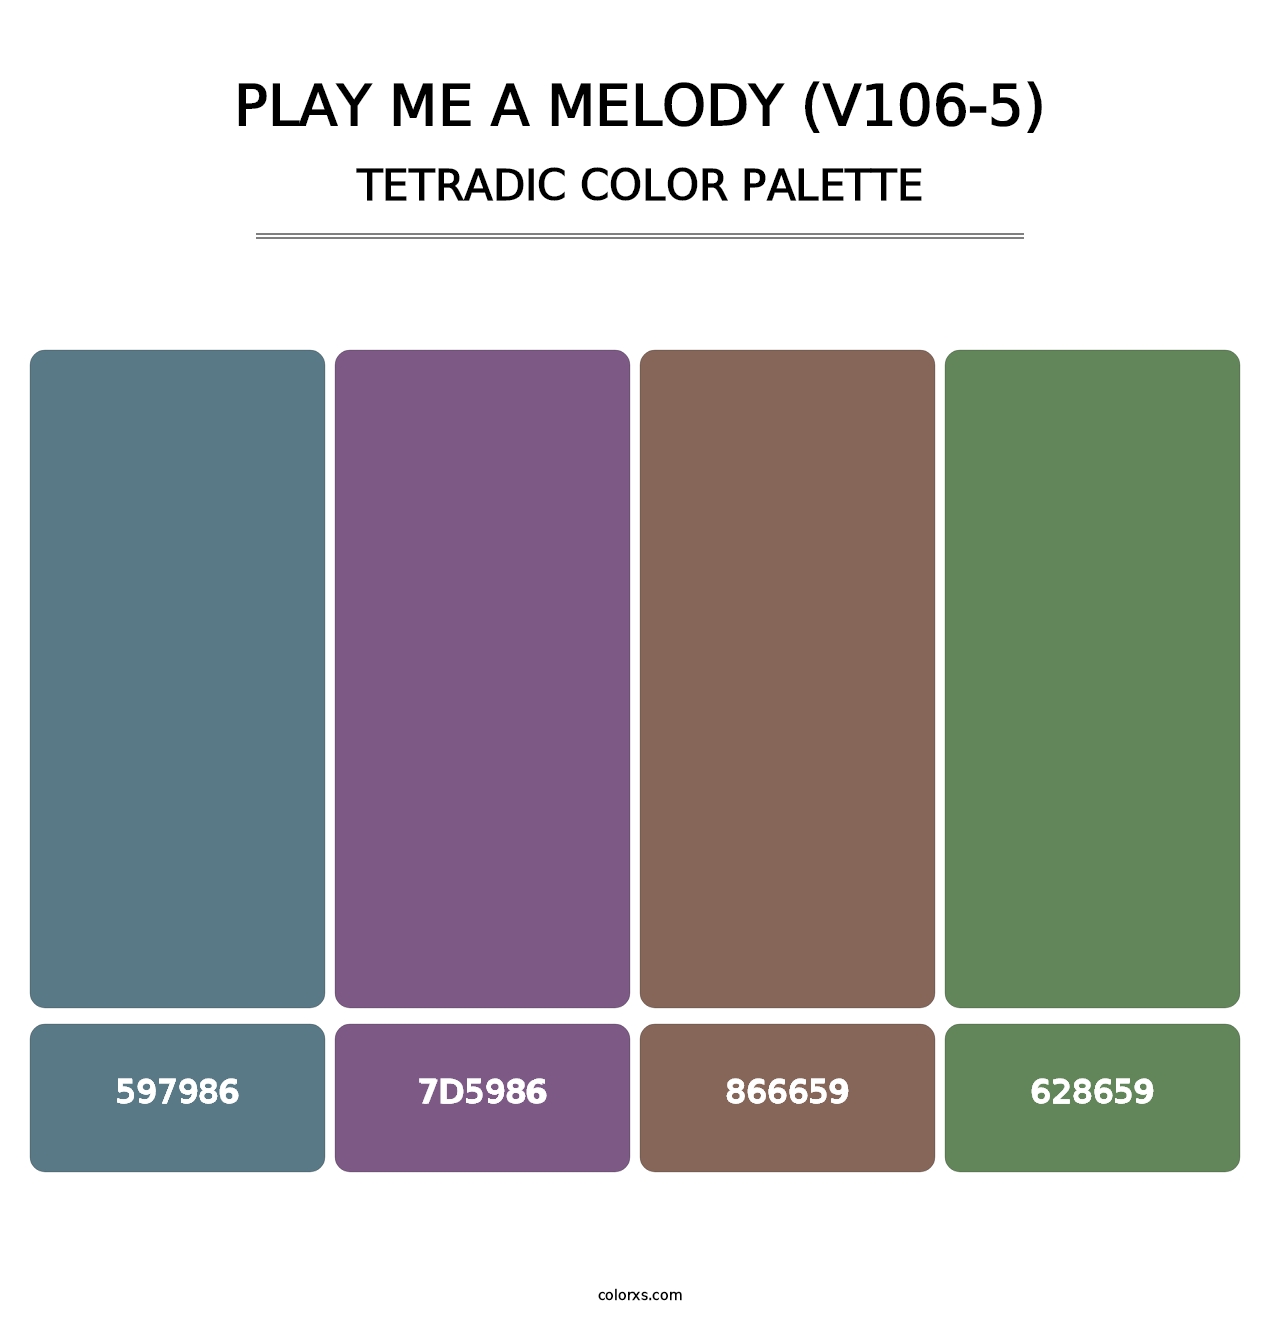 Play Me a Melody (V106-5) - Tetradic Color Palette